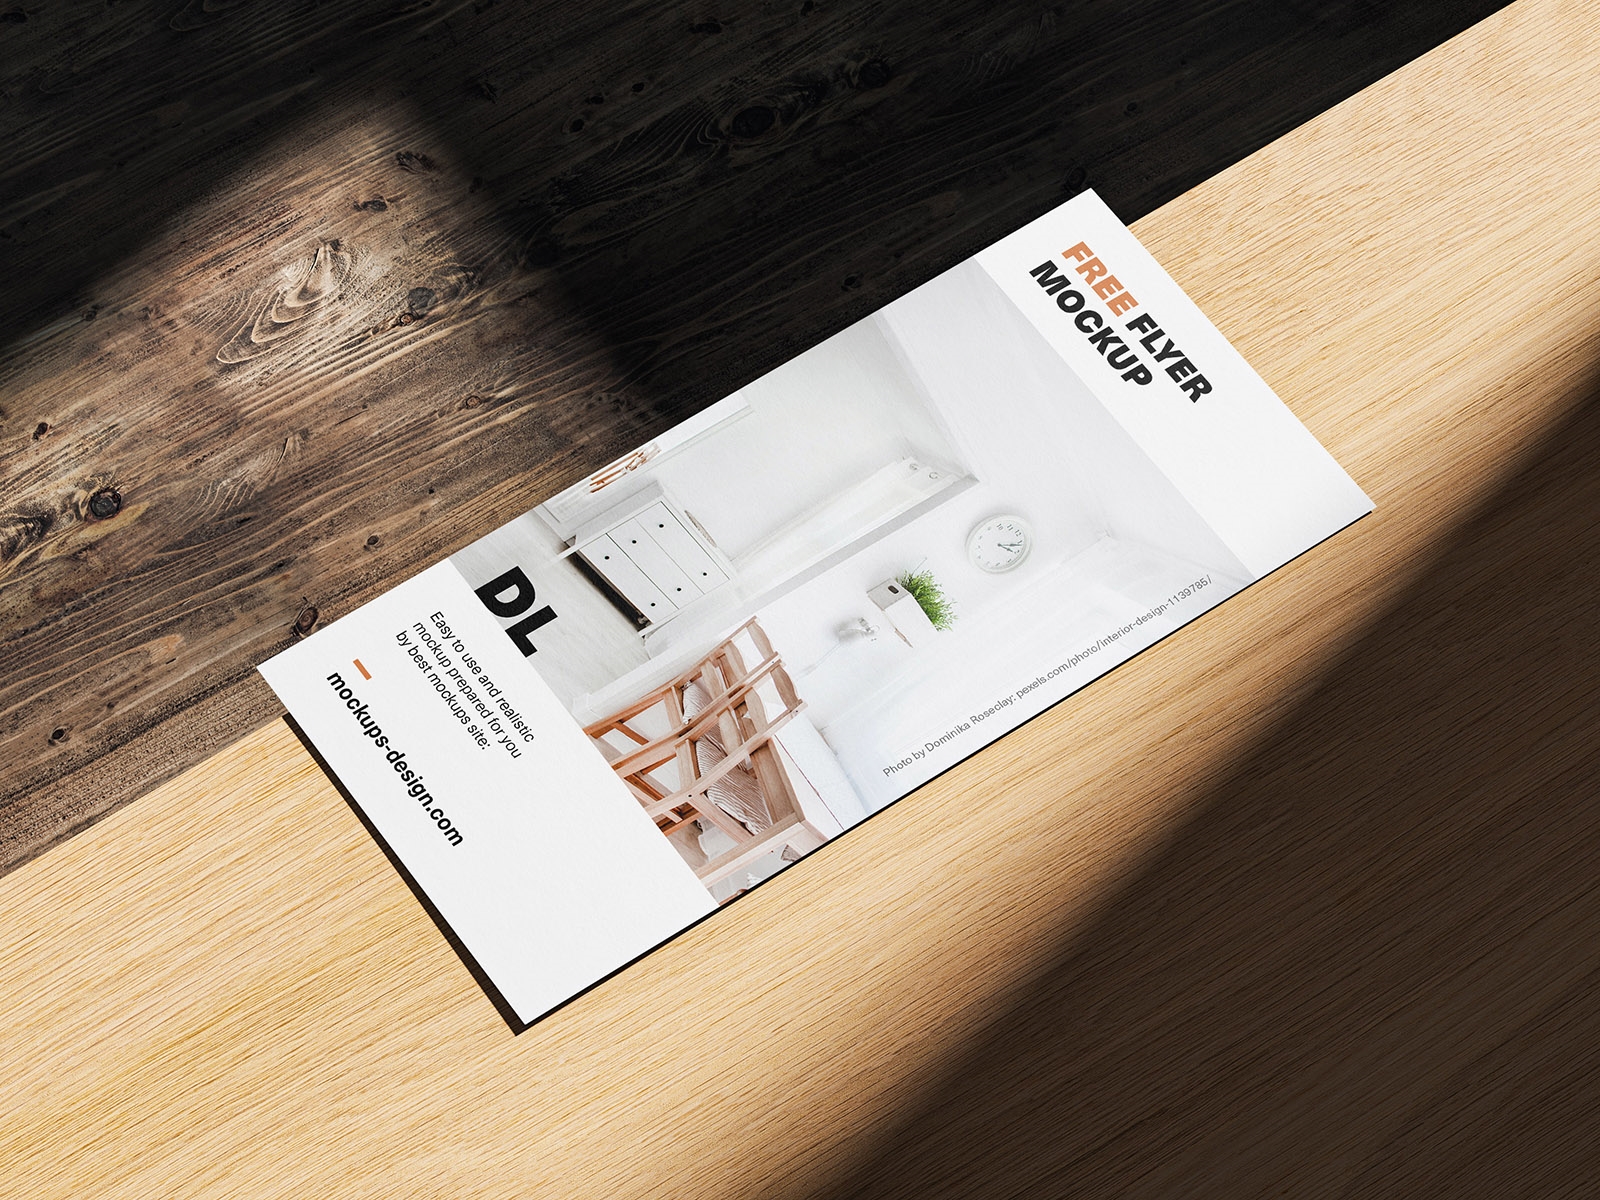 4 Perspective View DL Flyer on Wooden Floor Mockups with Shadows FREE PSD